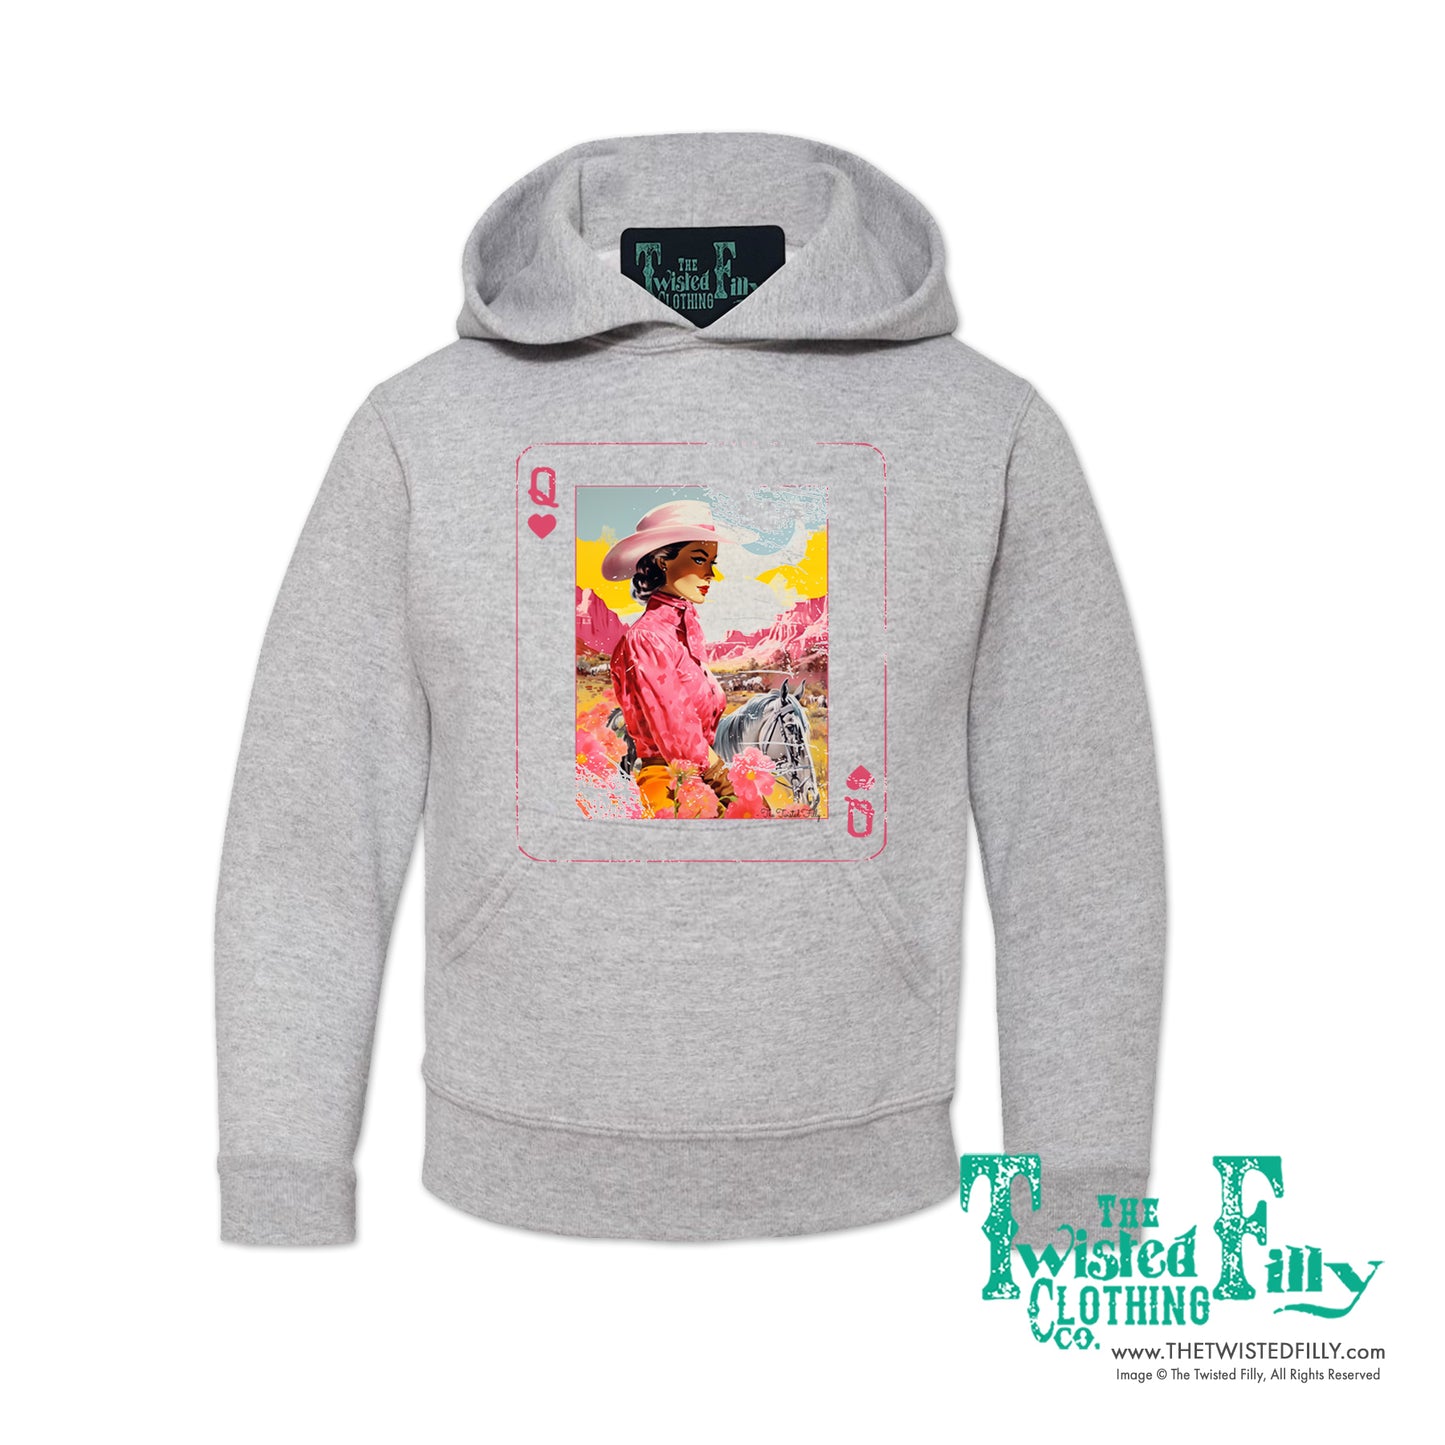 Queen Of Hearts - Girls Youth Hoodie - Assorted Colors